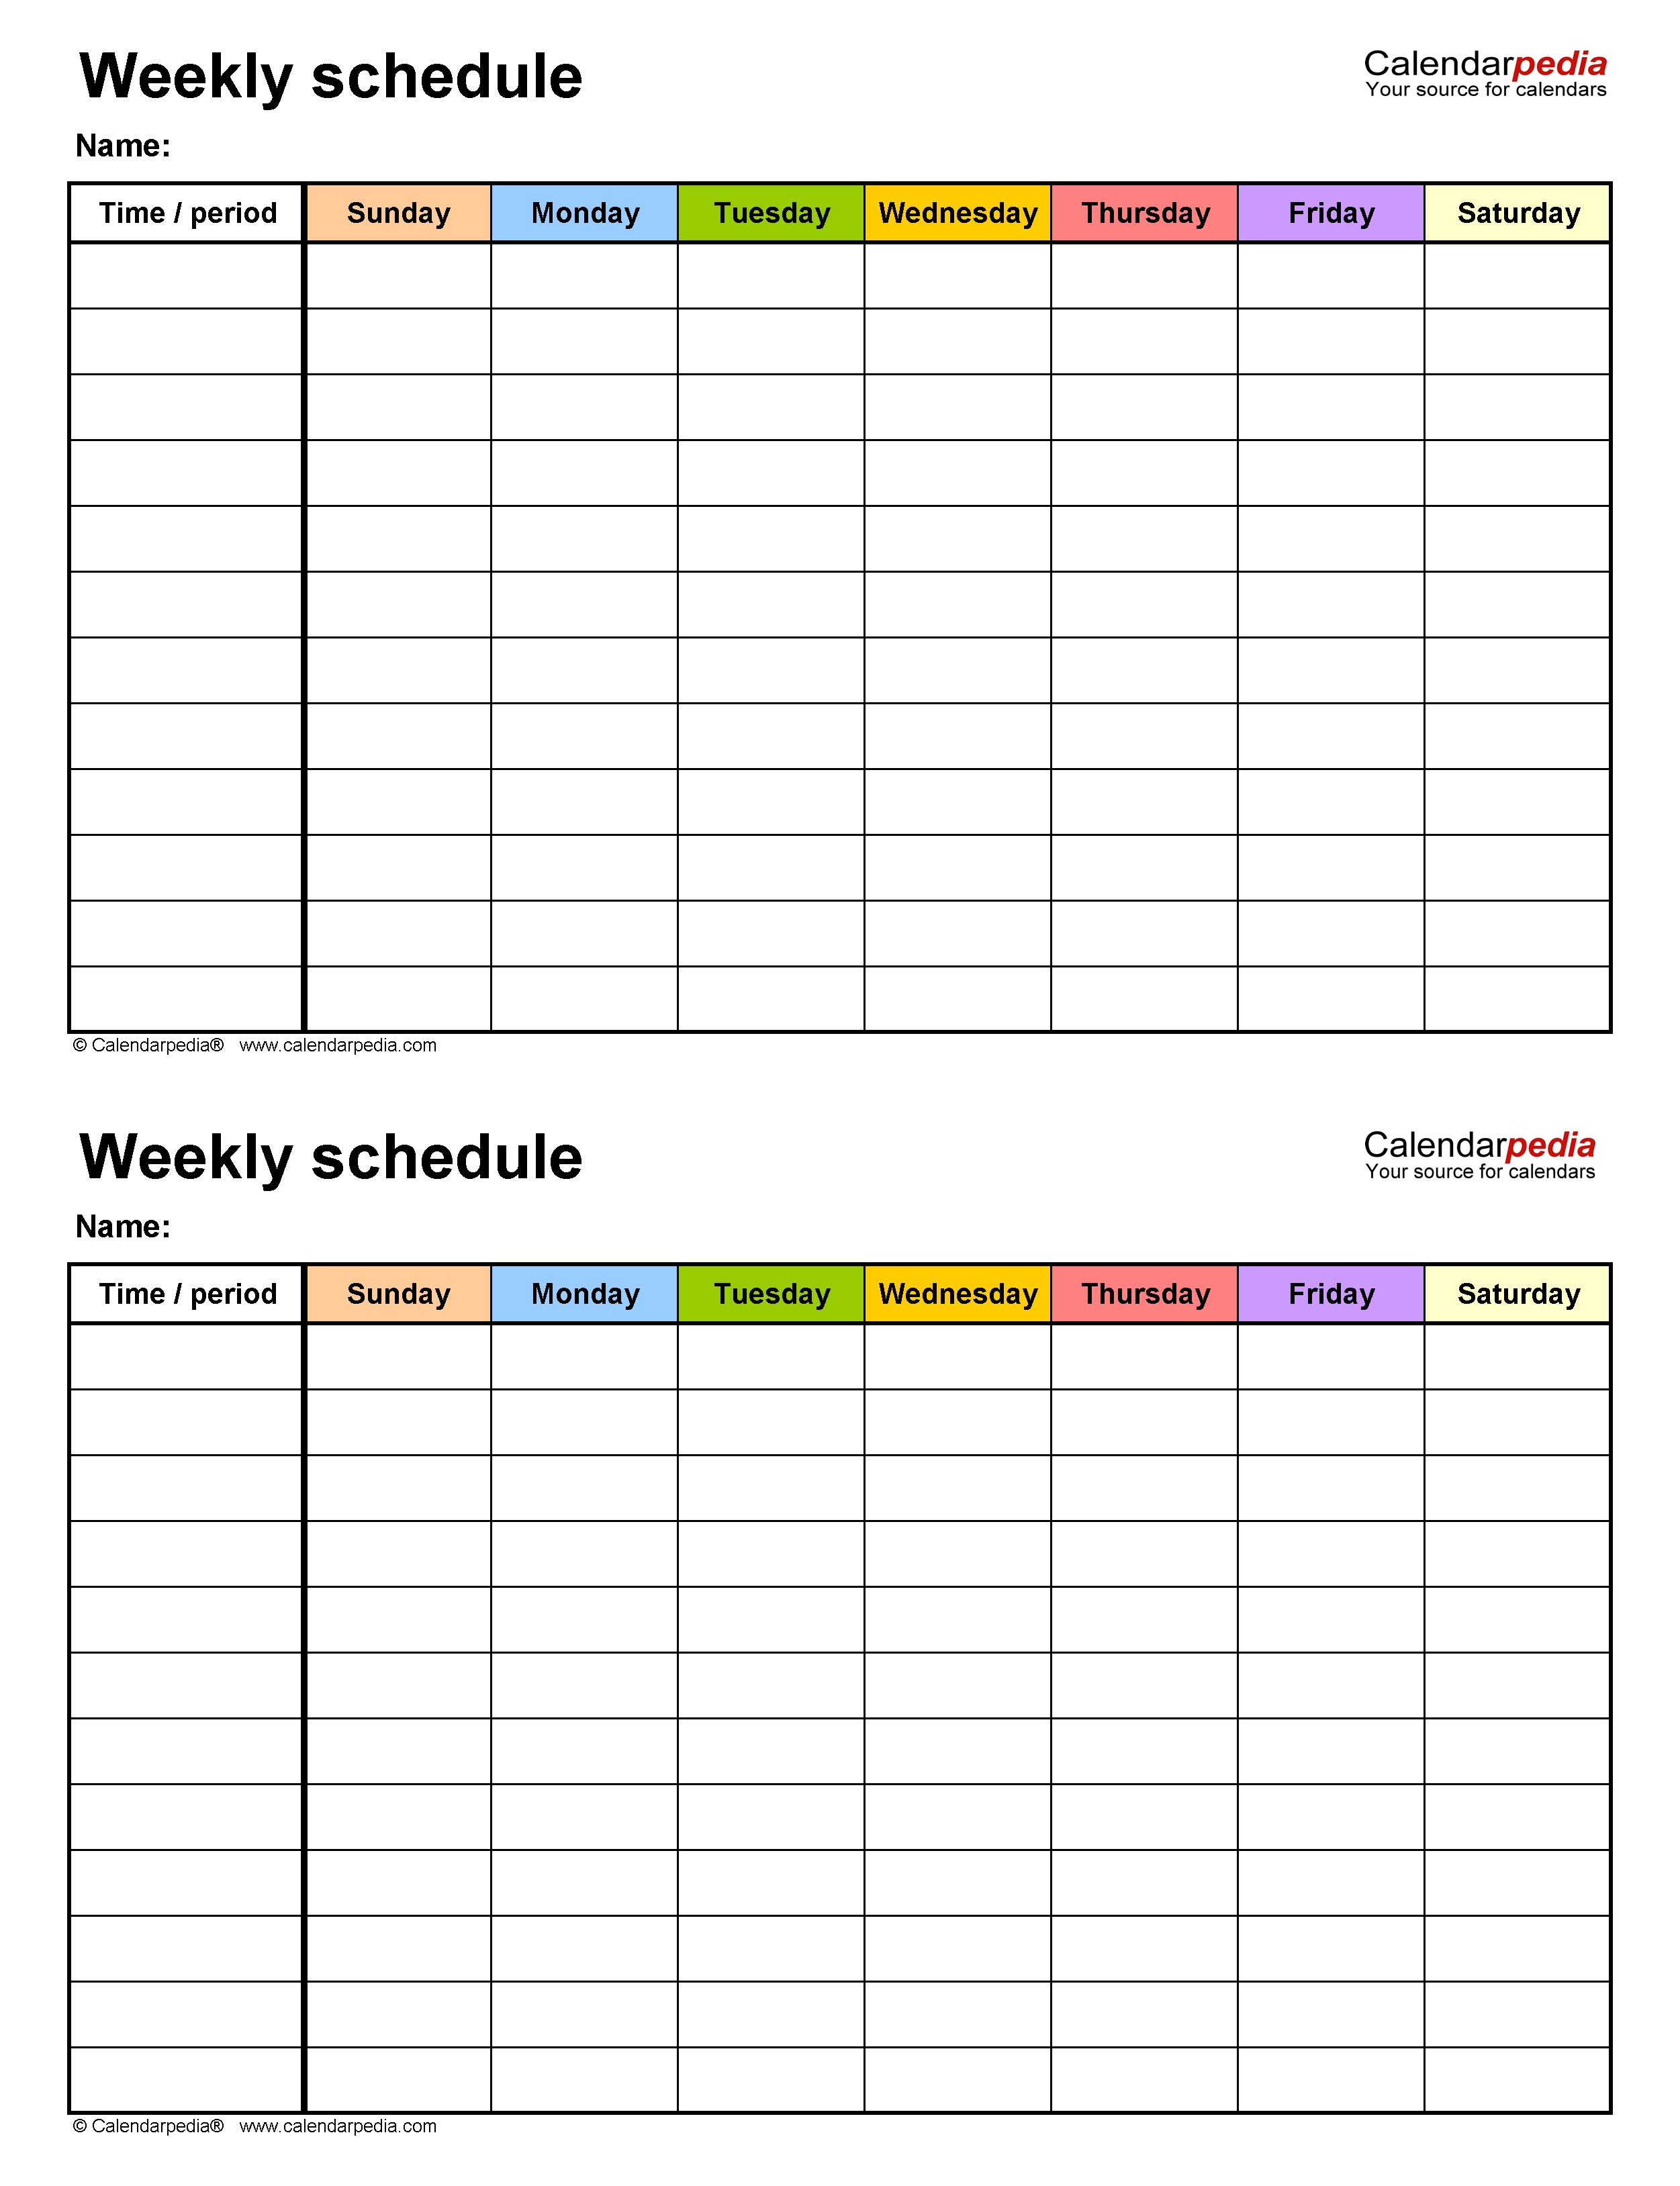 Free Weekly Schedule Templates For Word - 18 Templates with 1 Week Blank Calendar Free Printable